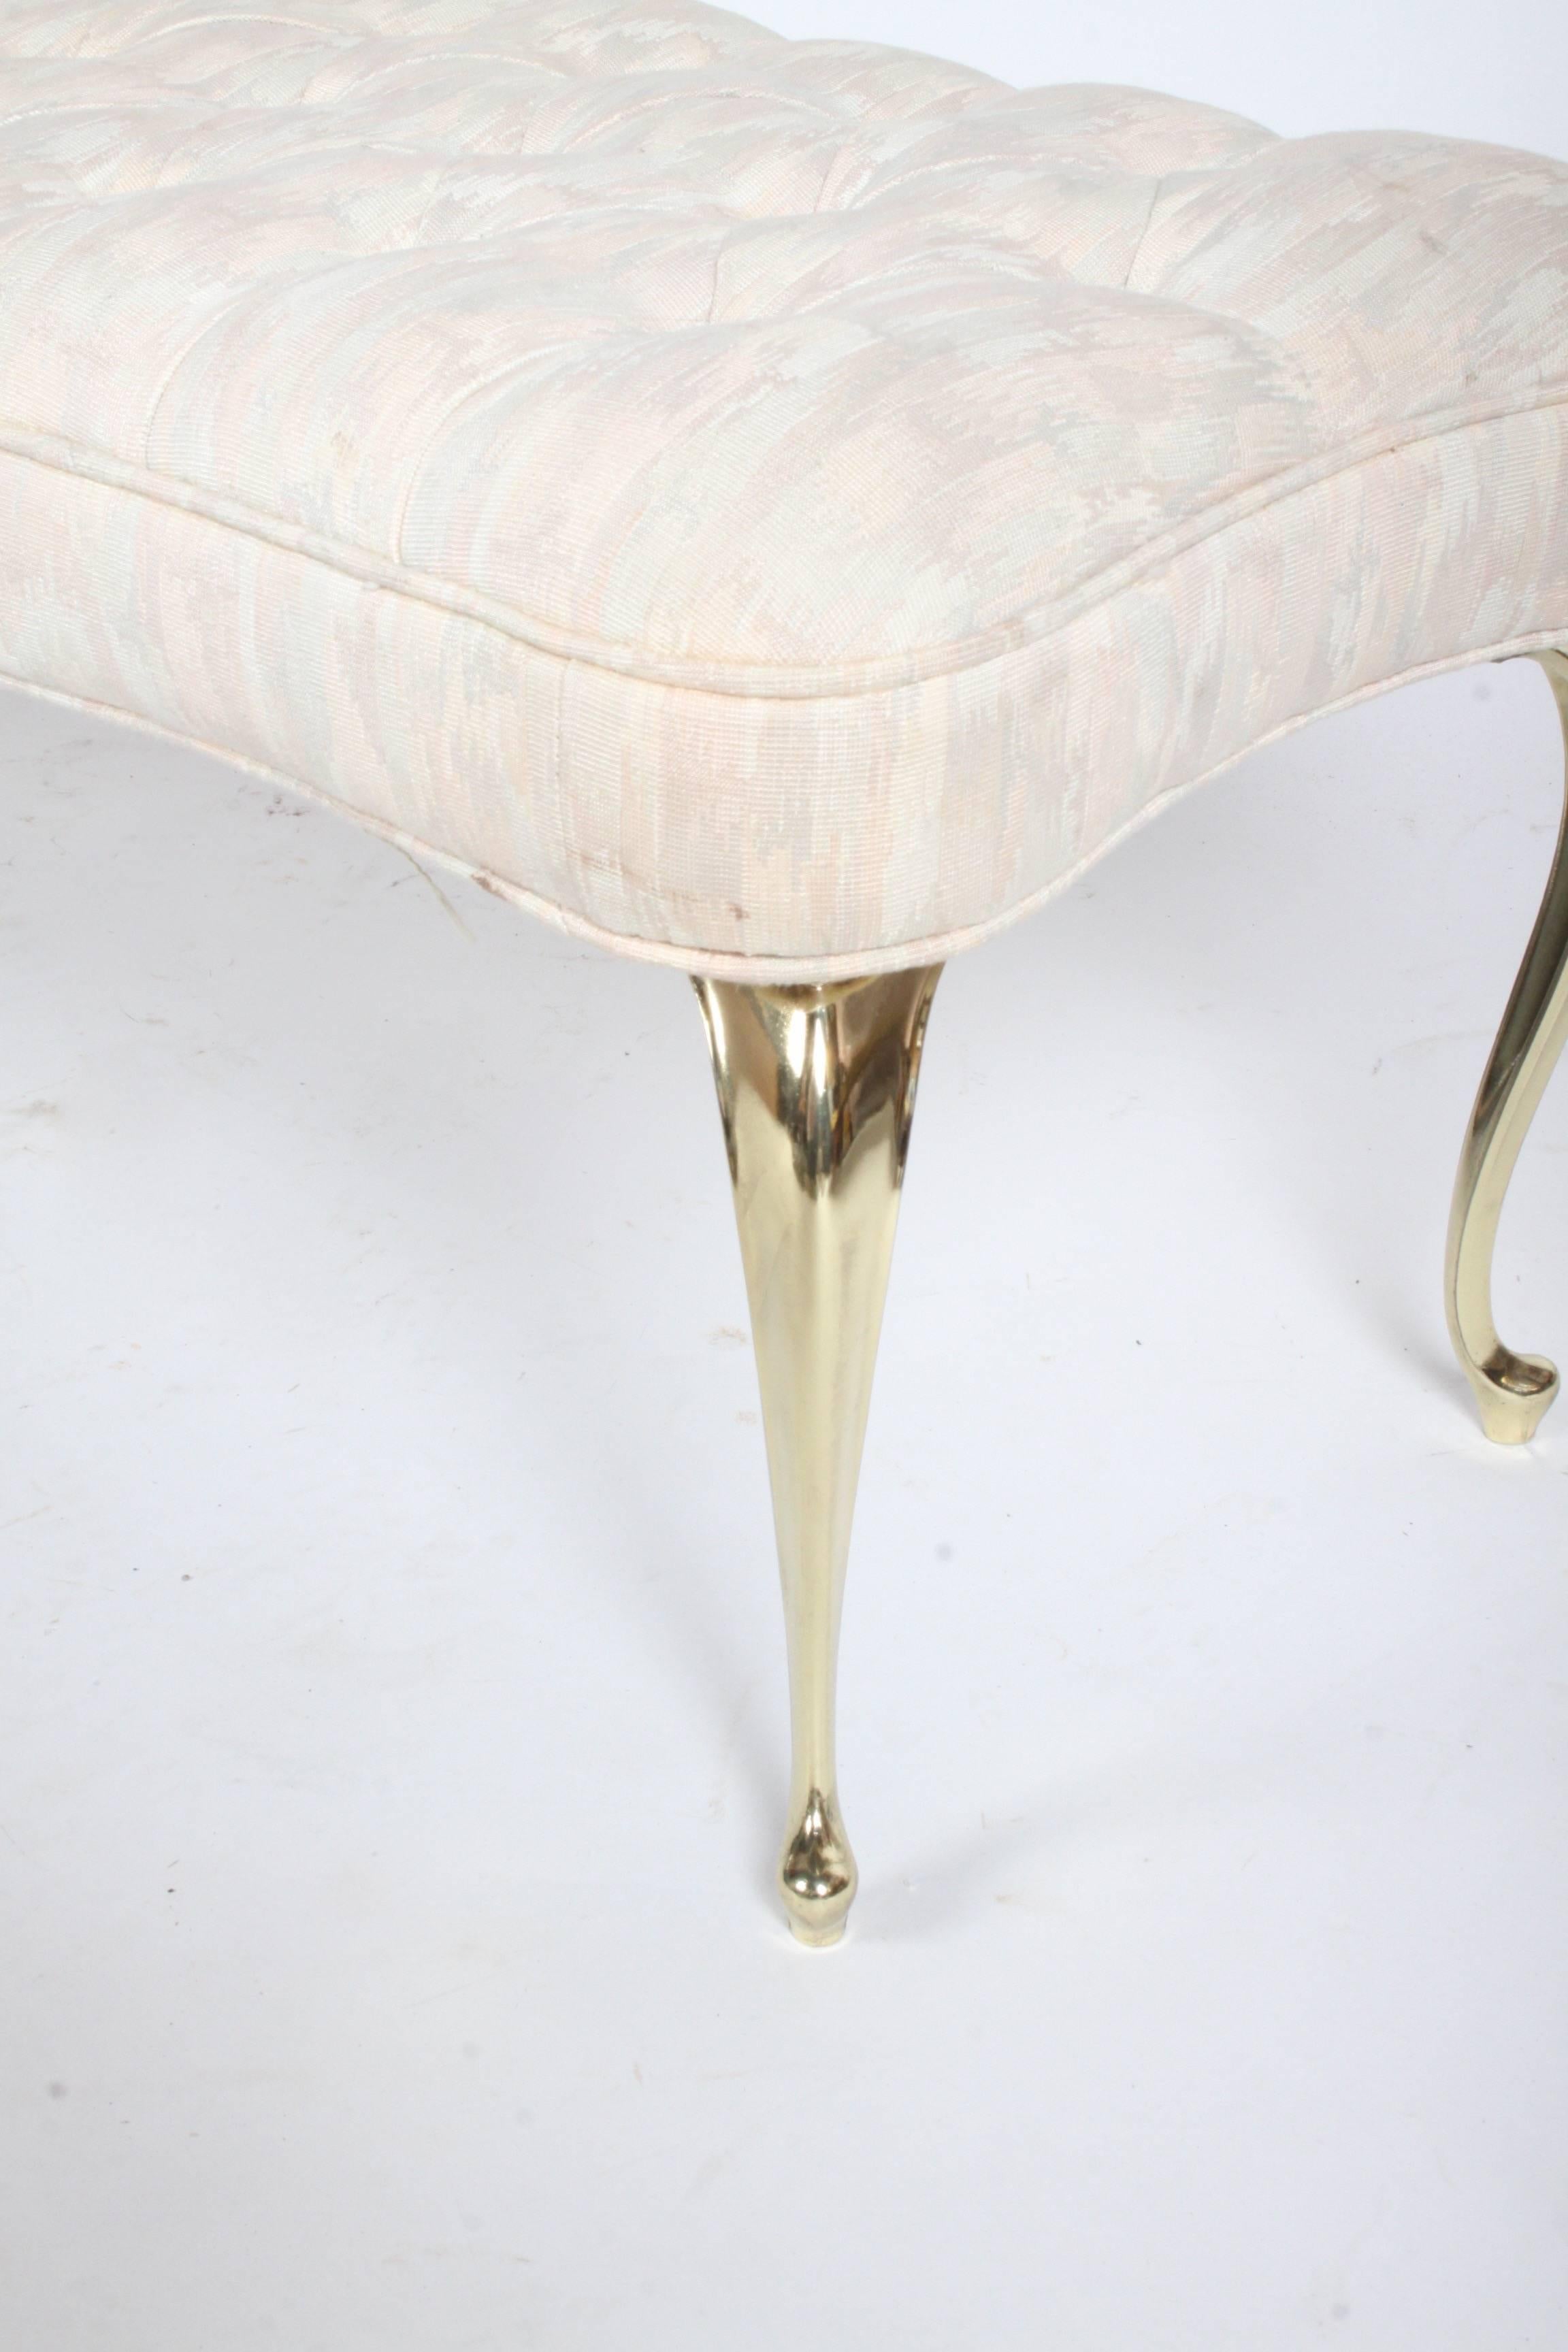 Plated Hollywood Regency Tufted Bench with Brass Legs For Sale